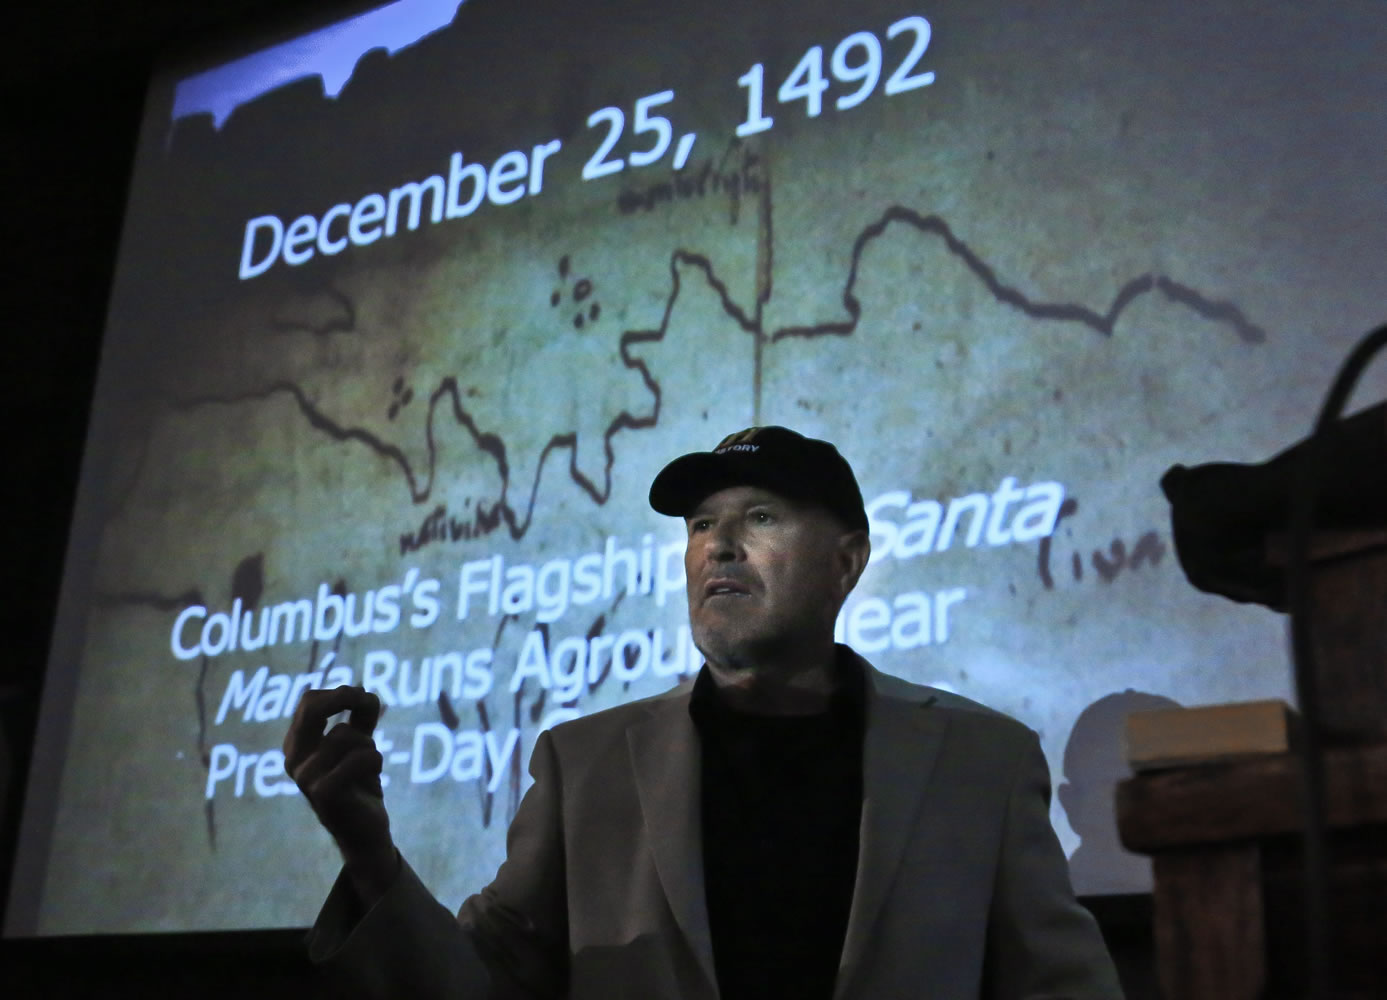 Associated Press
Undersea explorer Barry Clifford shows graphics during a press conference on Wednesday in New York. Clifford believes he has found the wreckage of Christopher Columbus' flagship vessel, Santa Maria.